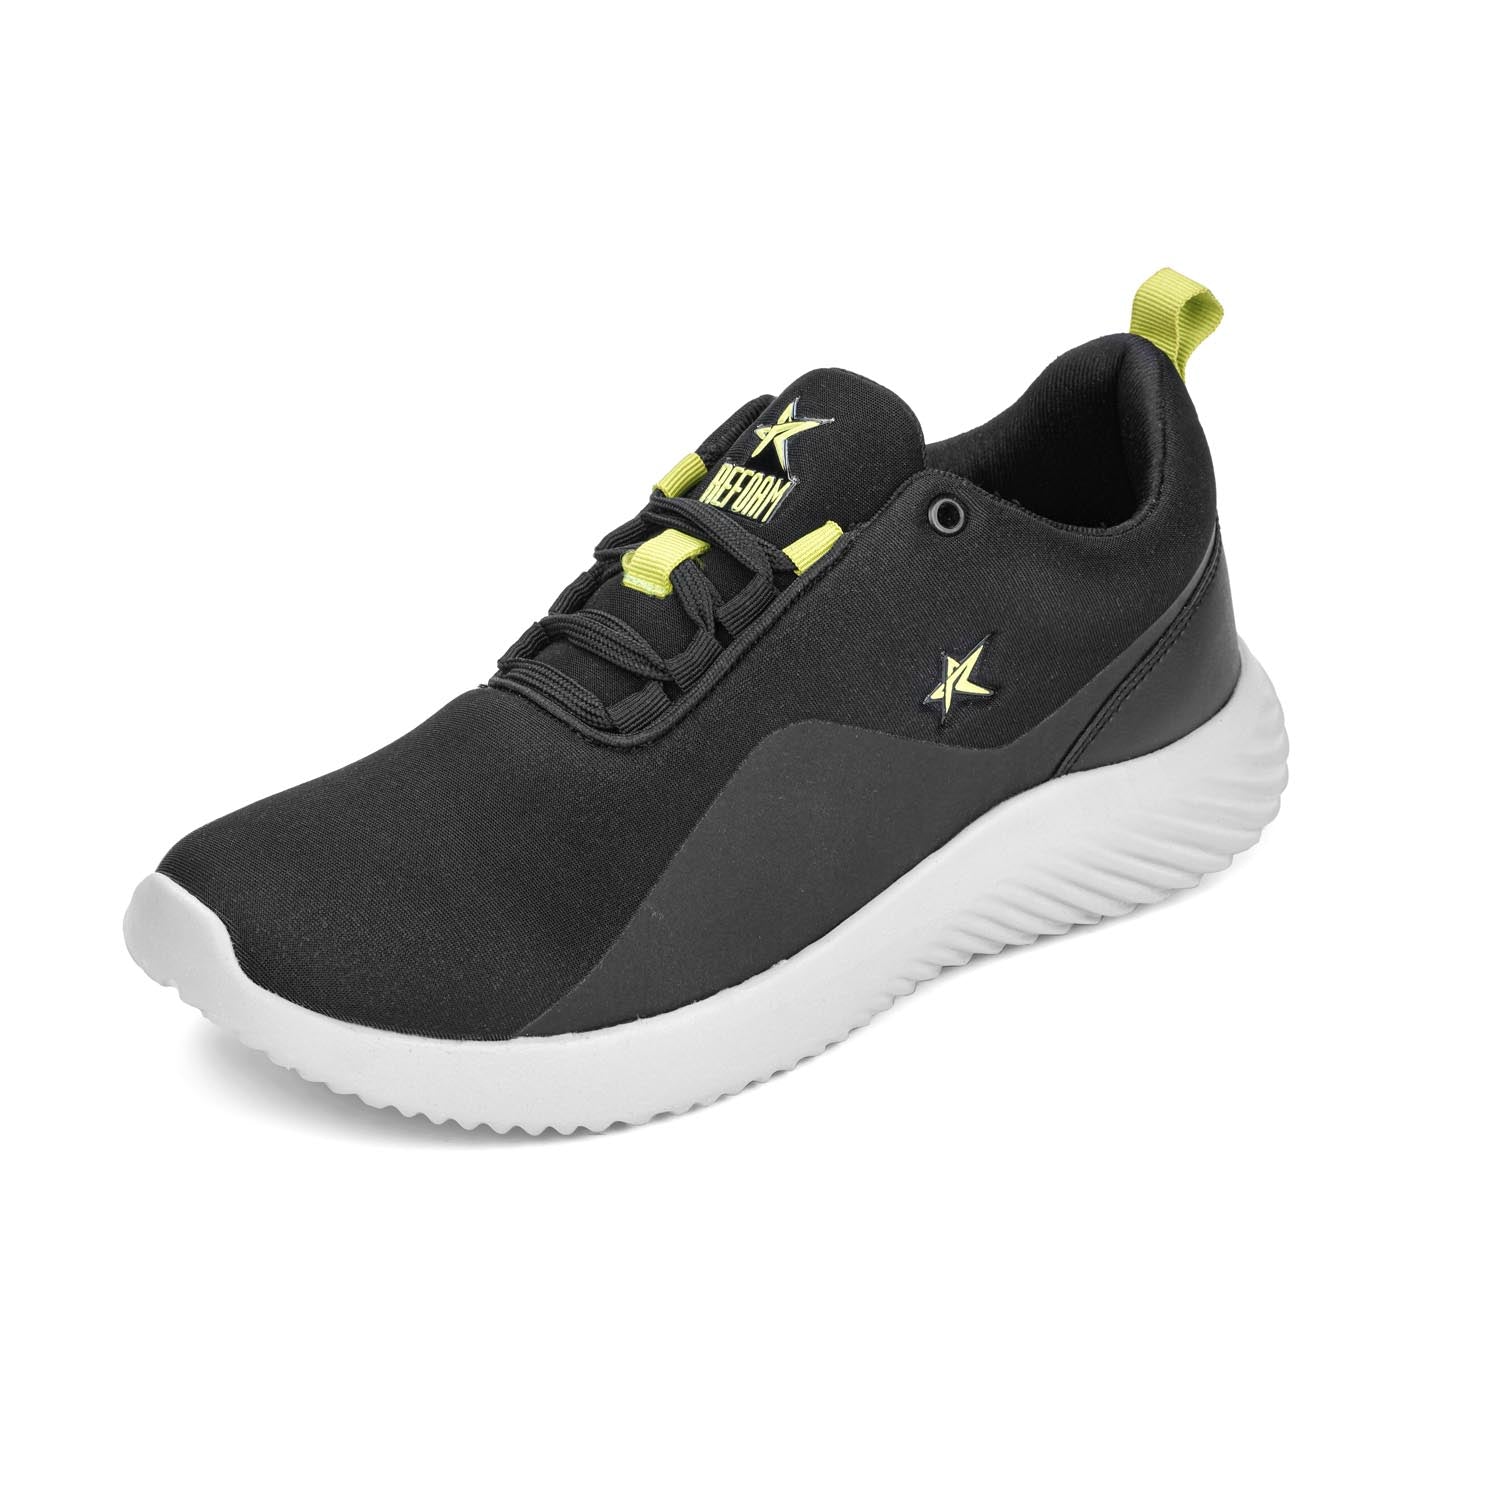 Black Solid Textile Lace Up Running Sport Shoes For Men